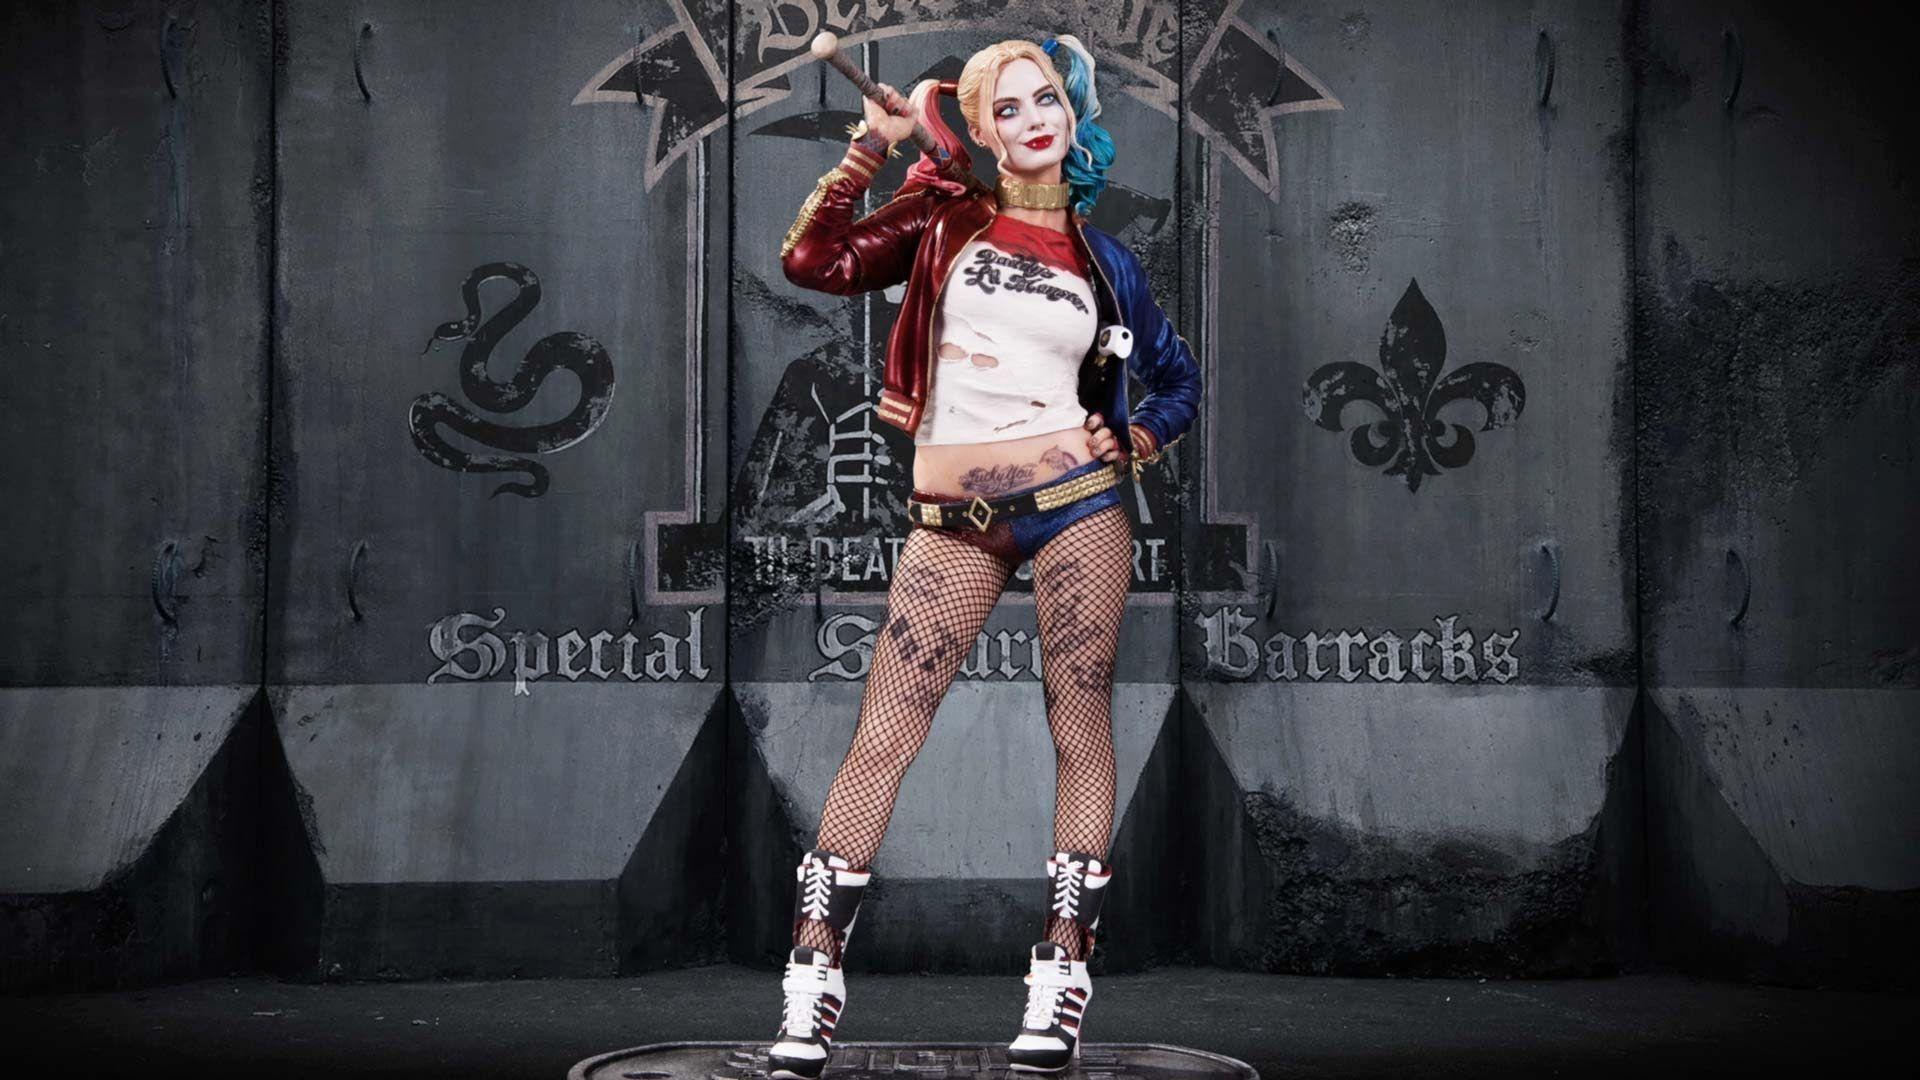 Astonishing Suicide Squad Wallpaper HD Download. Suicide Squad